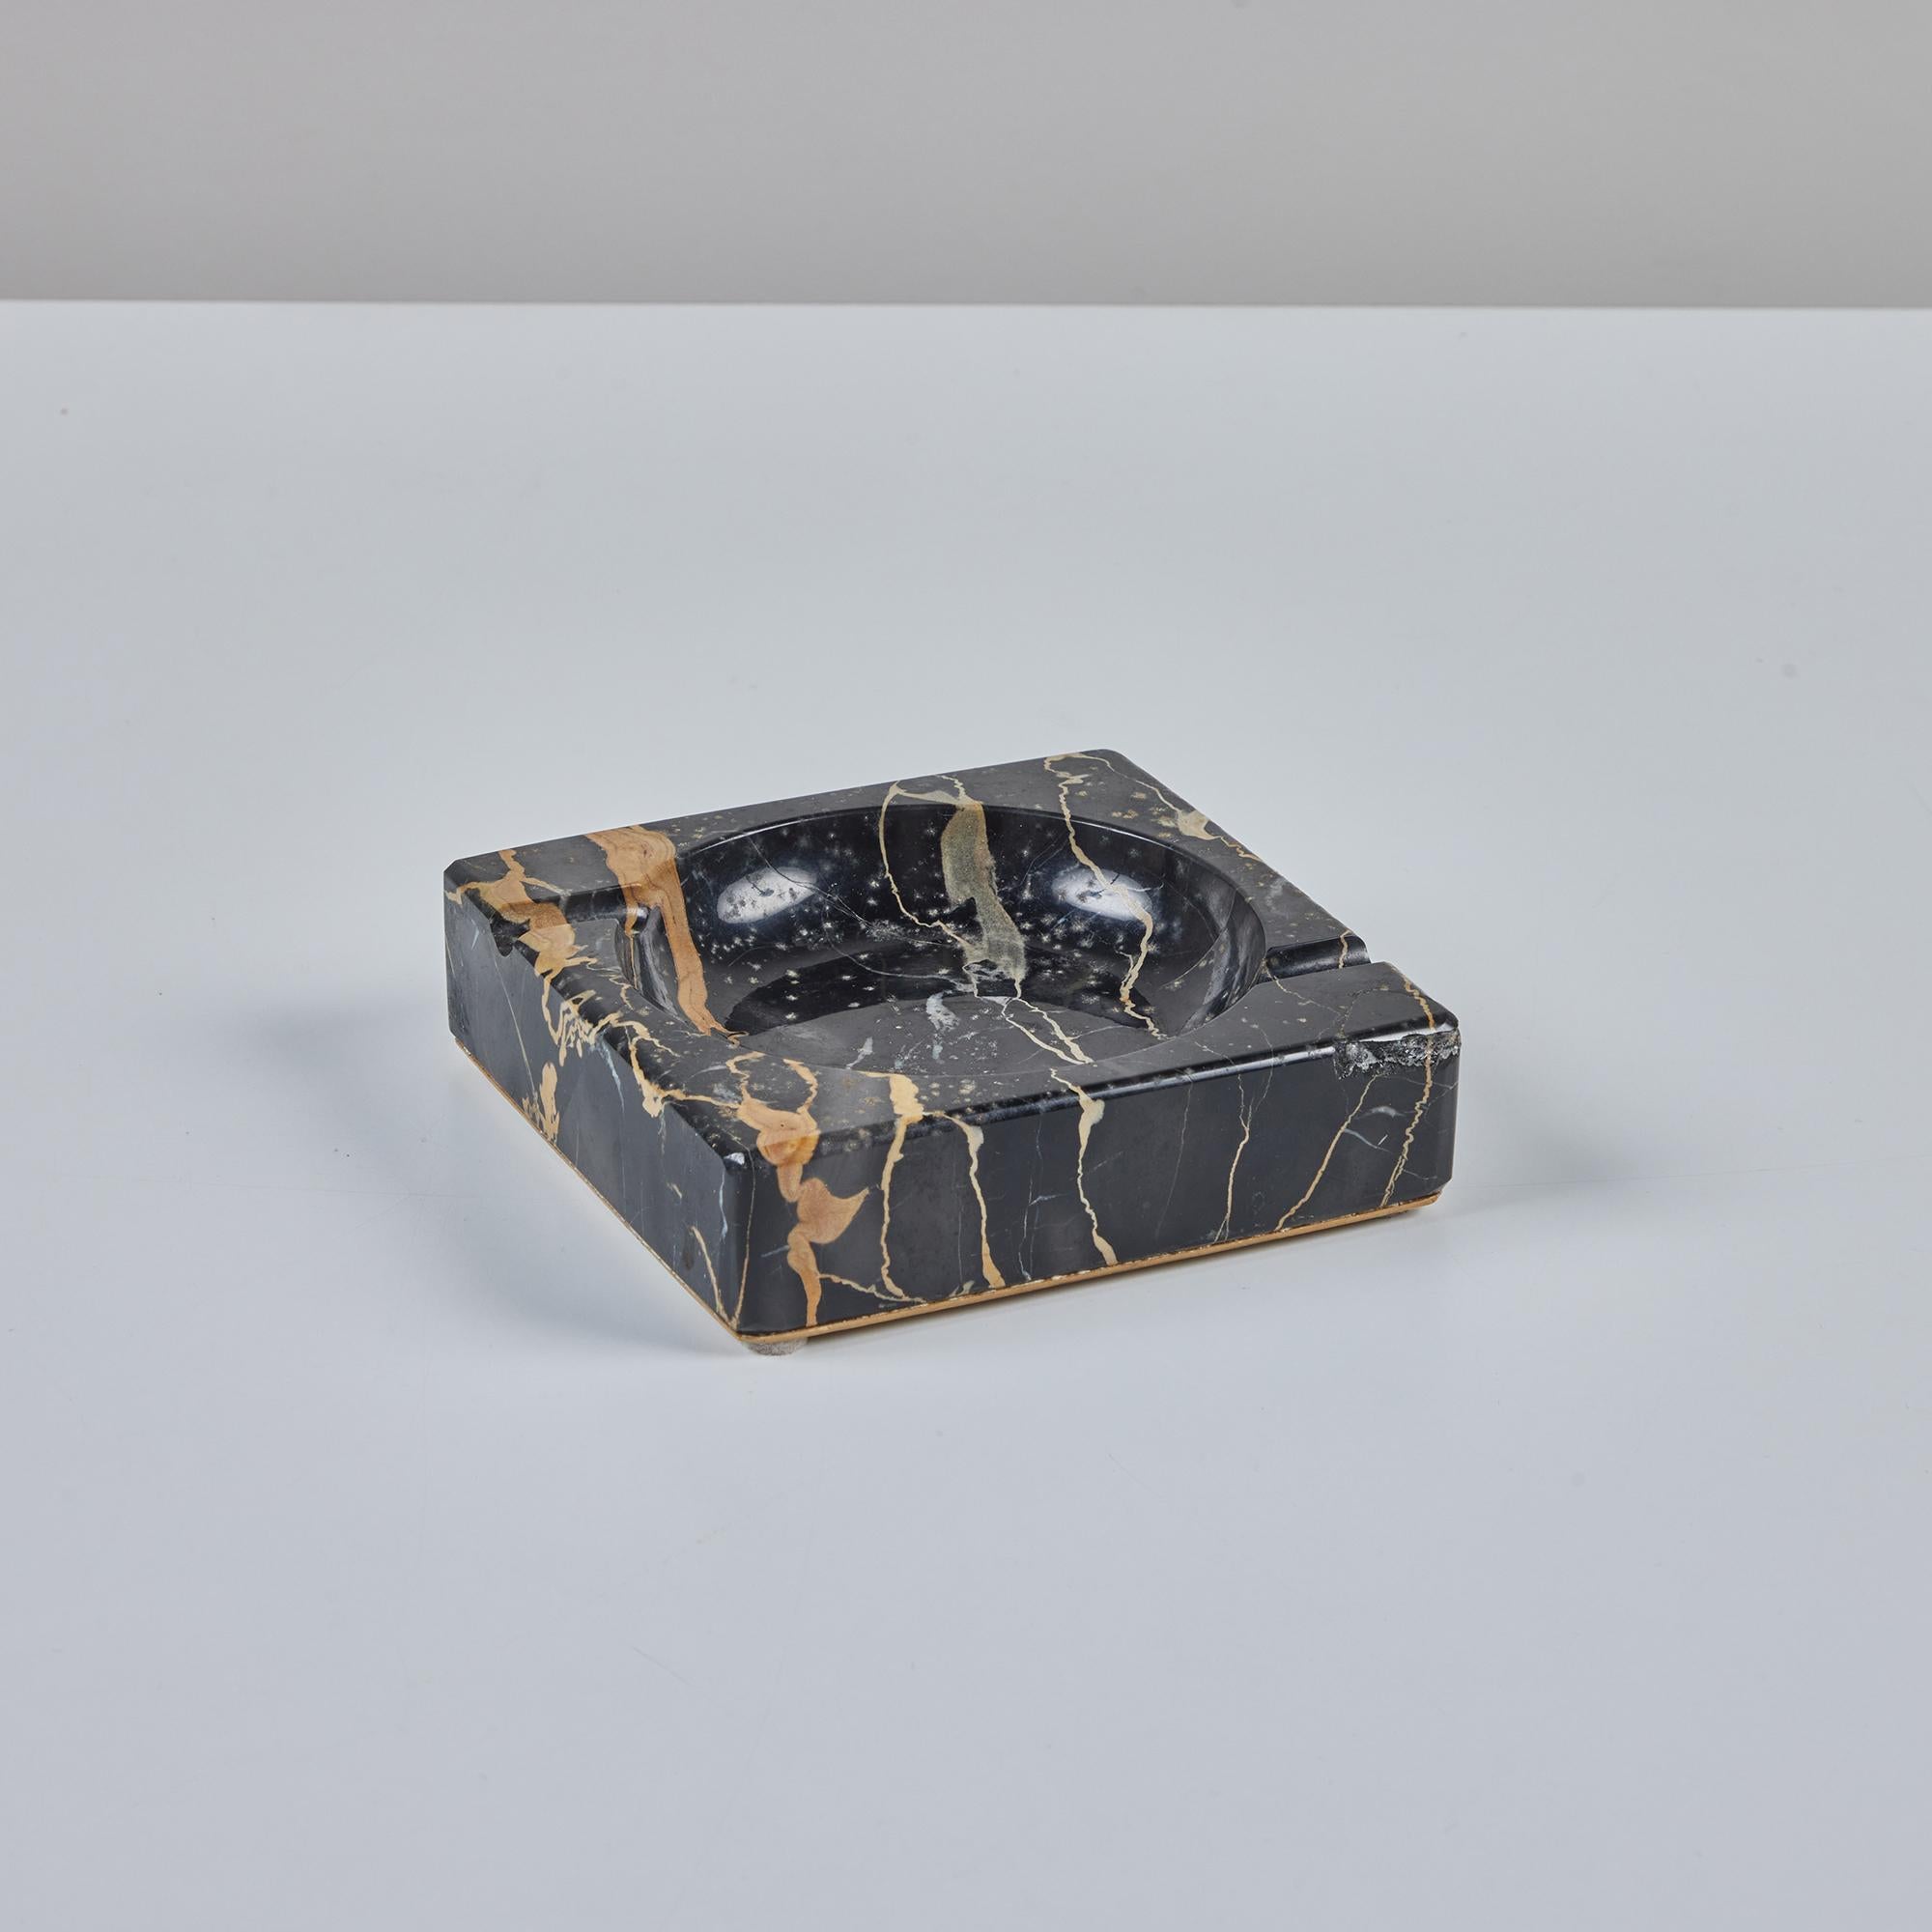 Square marble ashtray in a polished black marble with cream and tan veining by the Candoro Marble Company of Knoxville, Tennessee founded in 1914. The piece has a circular well, and two routed asymmetrical indentations perpendicular to its edges.